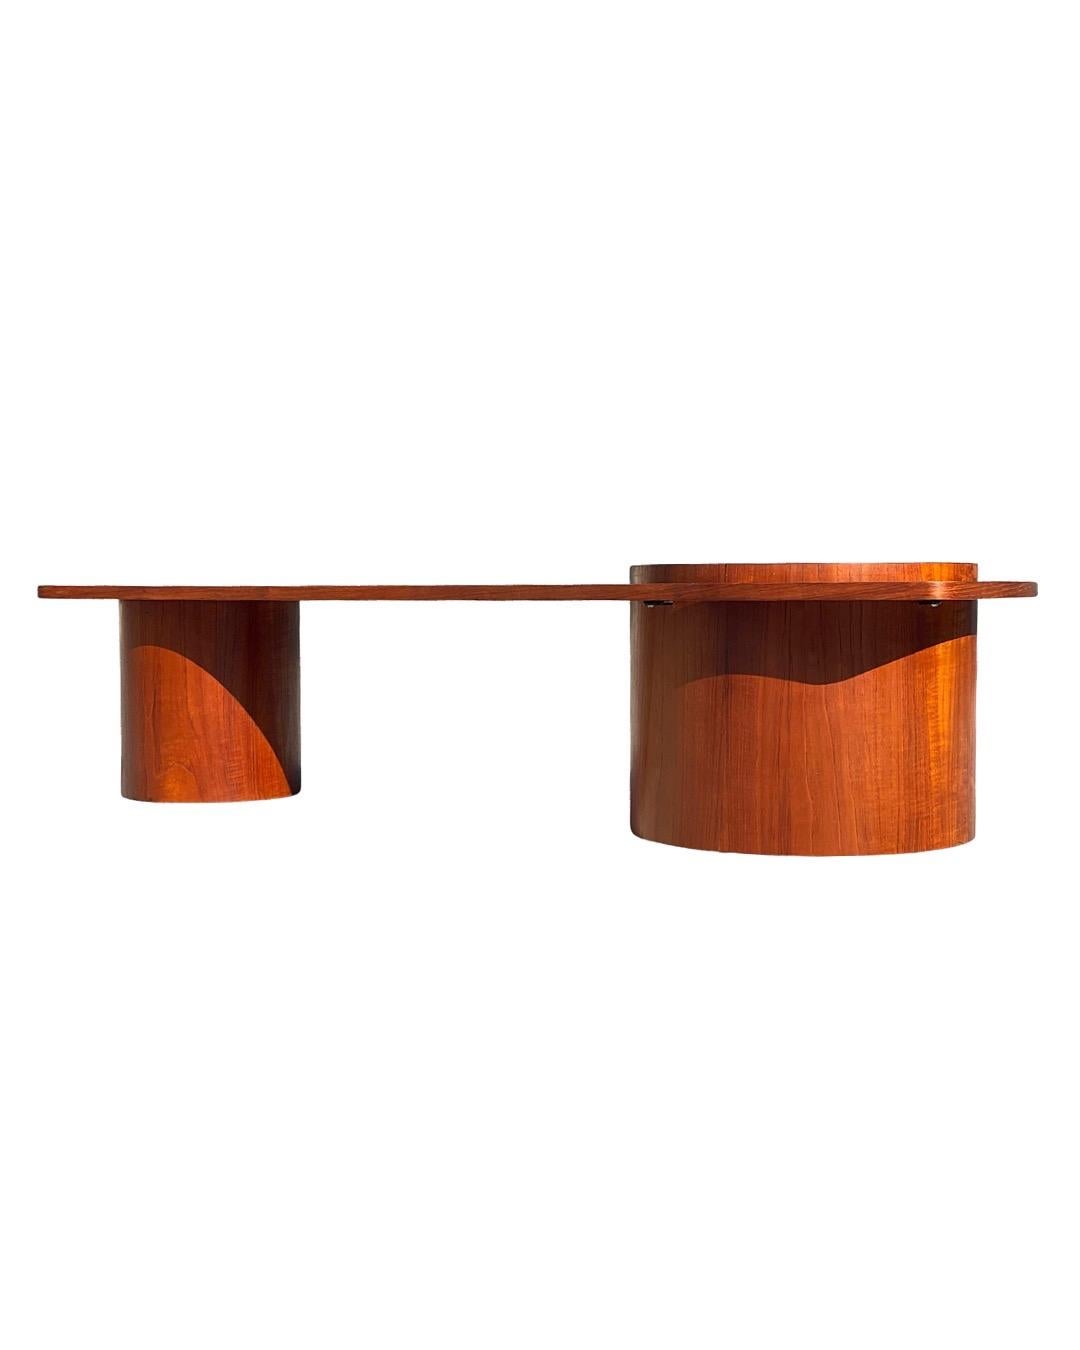 Canadian Mid Century Floating Coffee Table by RS Associates in Teak for Expo 67, Montreal